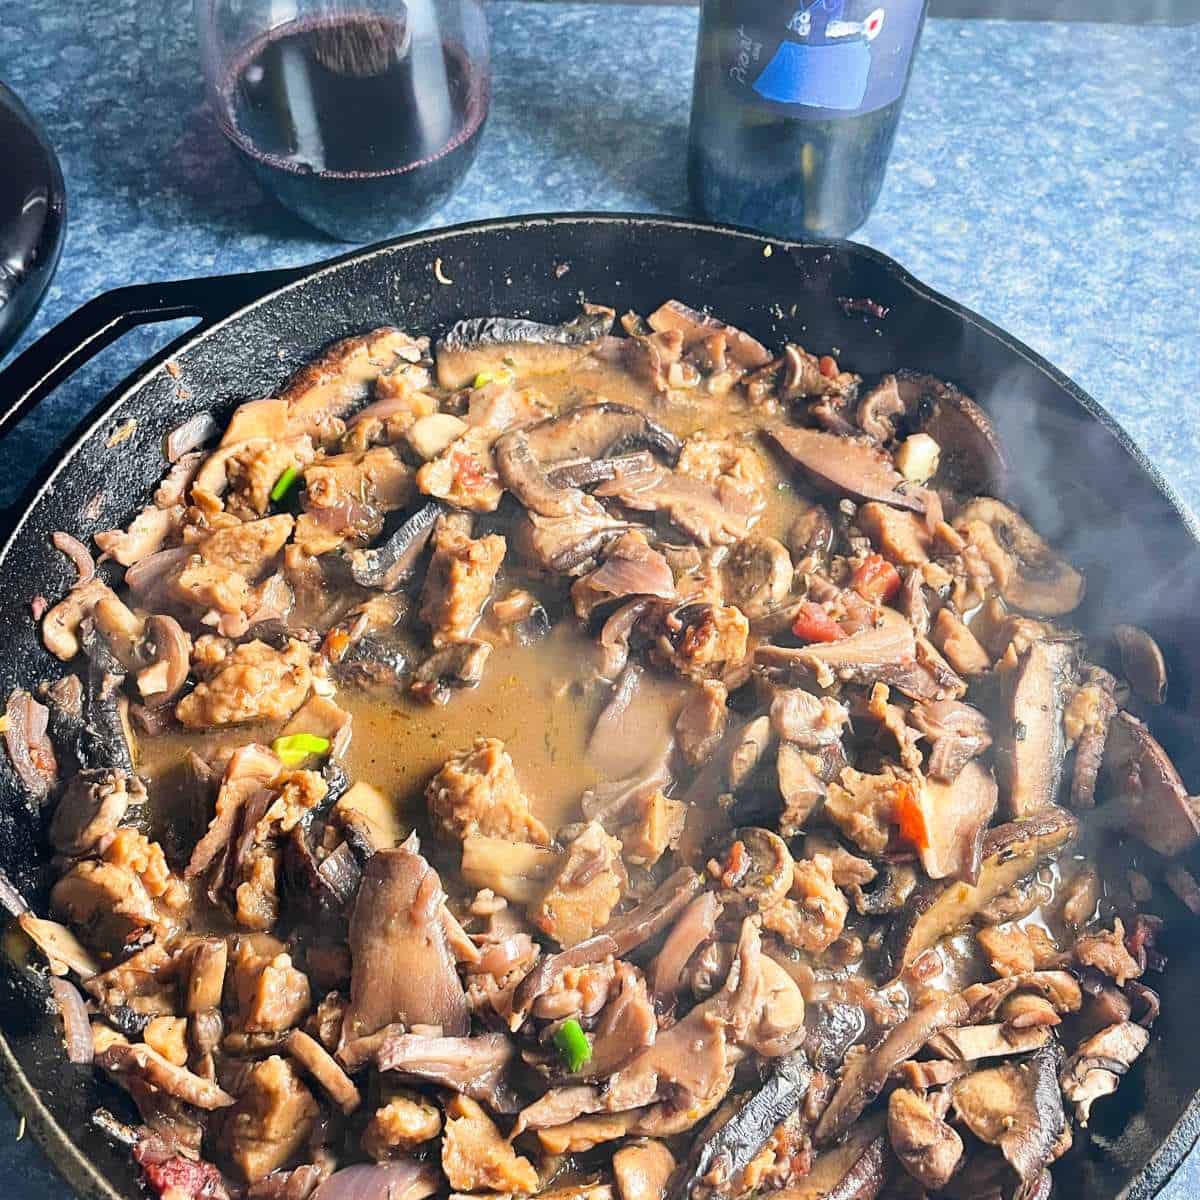 skillet with mushrooms cooked in sauce with steam rising. Red wine in the background.